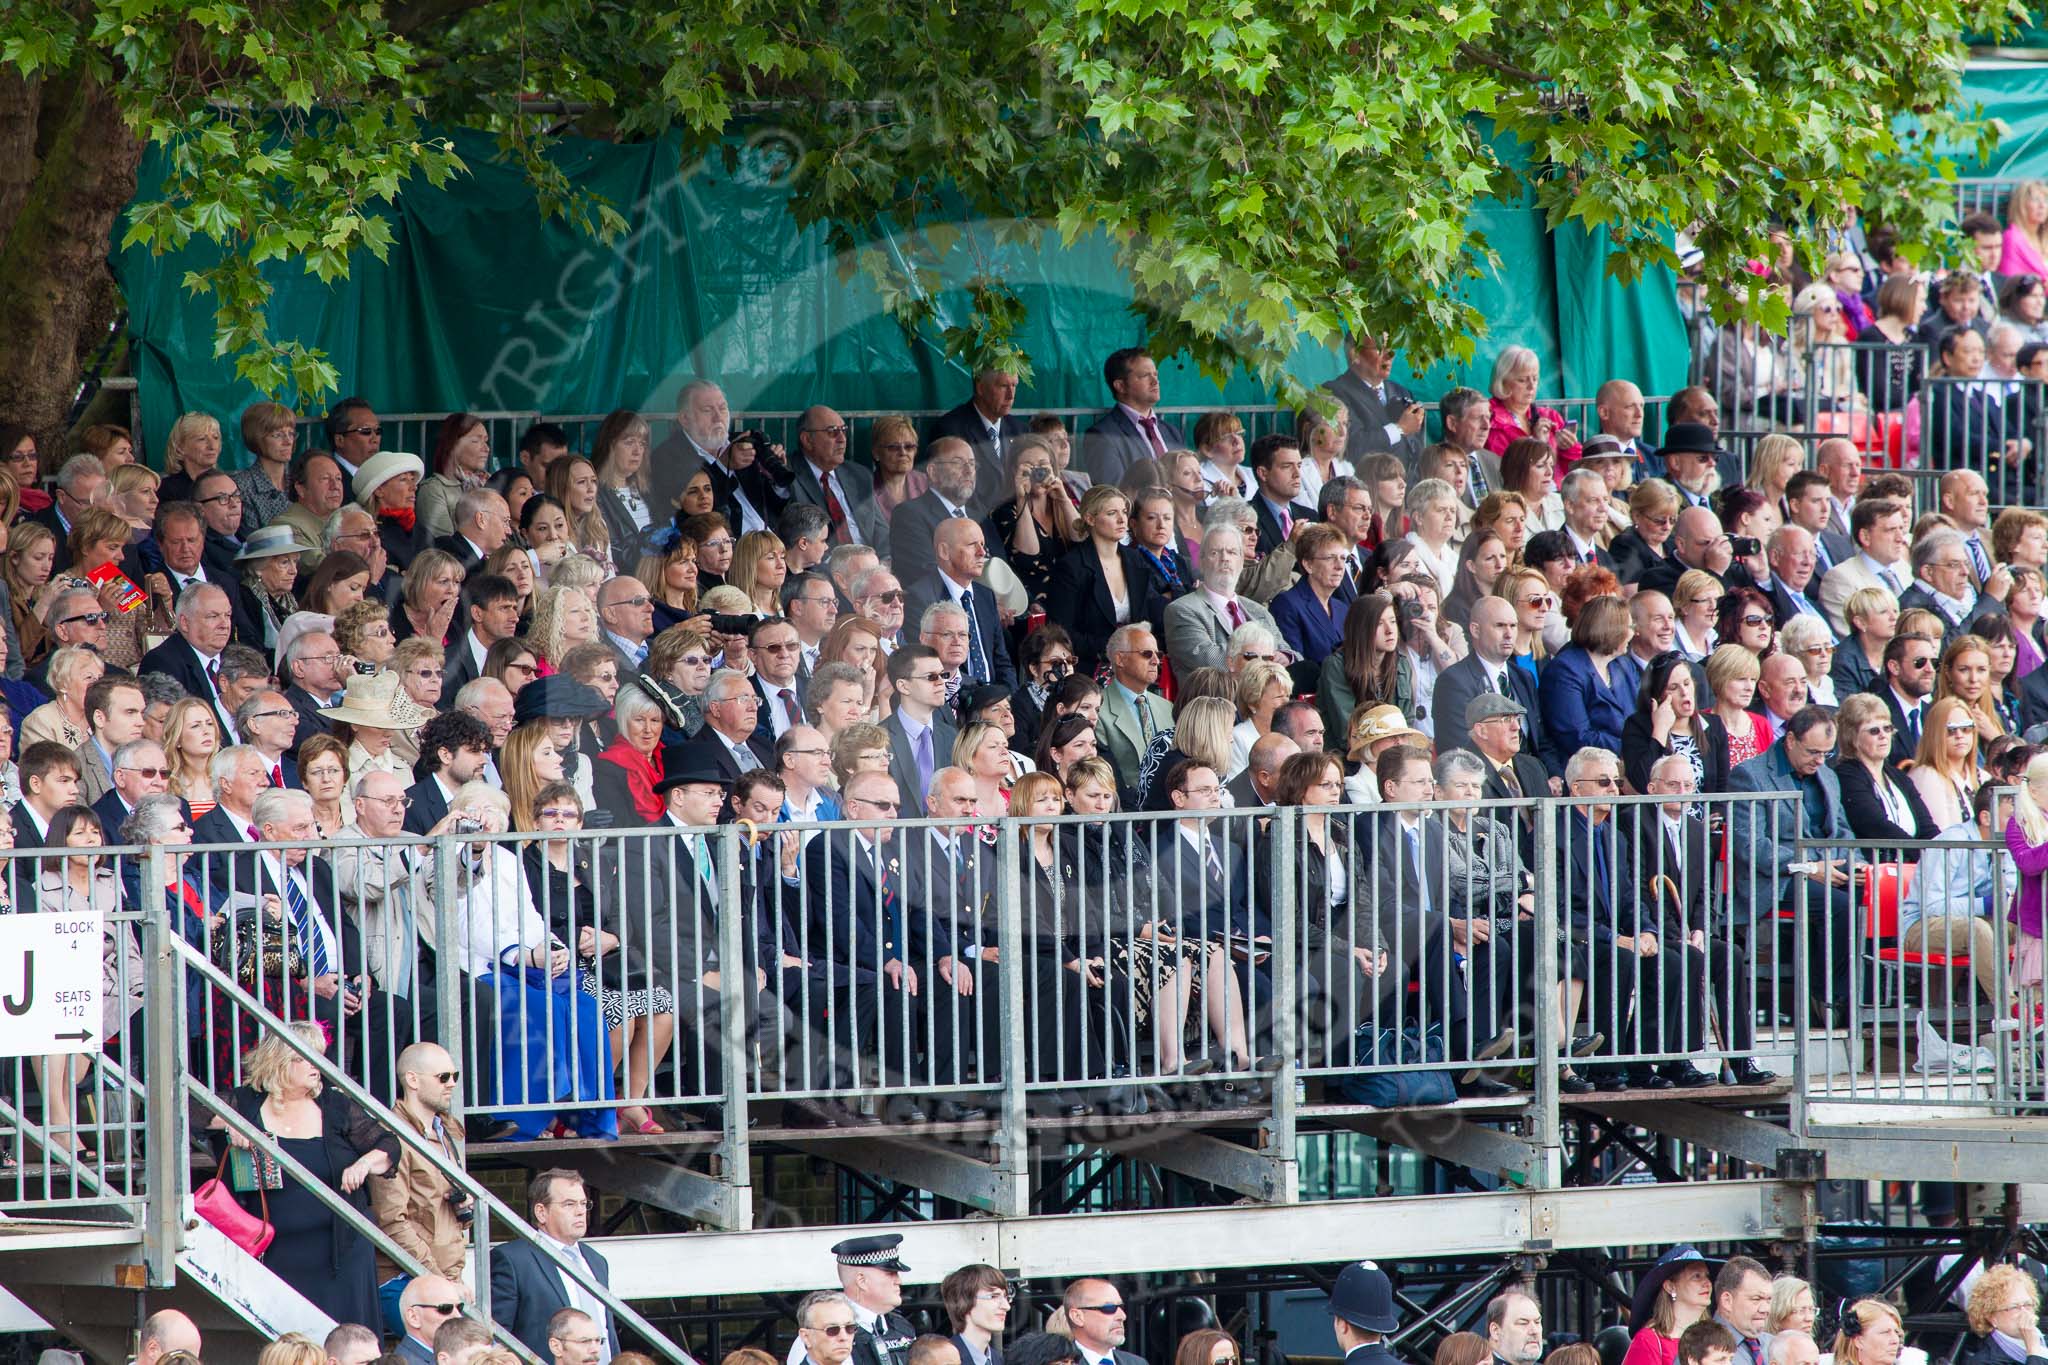 Trooping the Colour 2013 (spectators). Image #1057, 15 June 2013 11:23